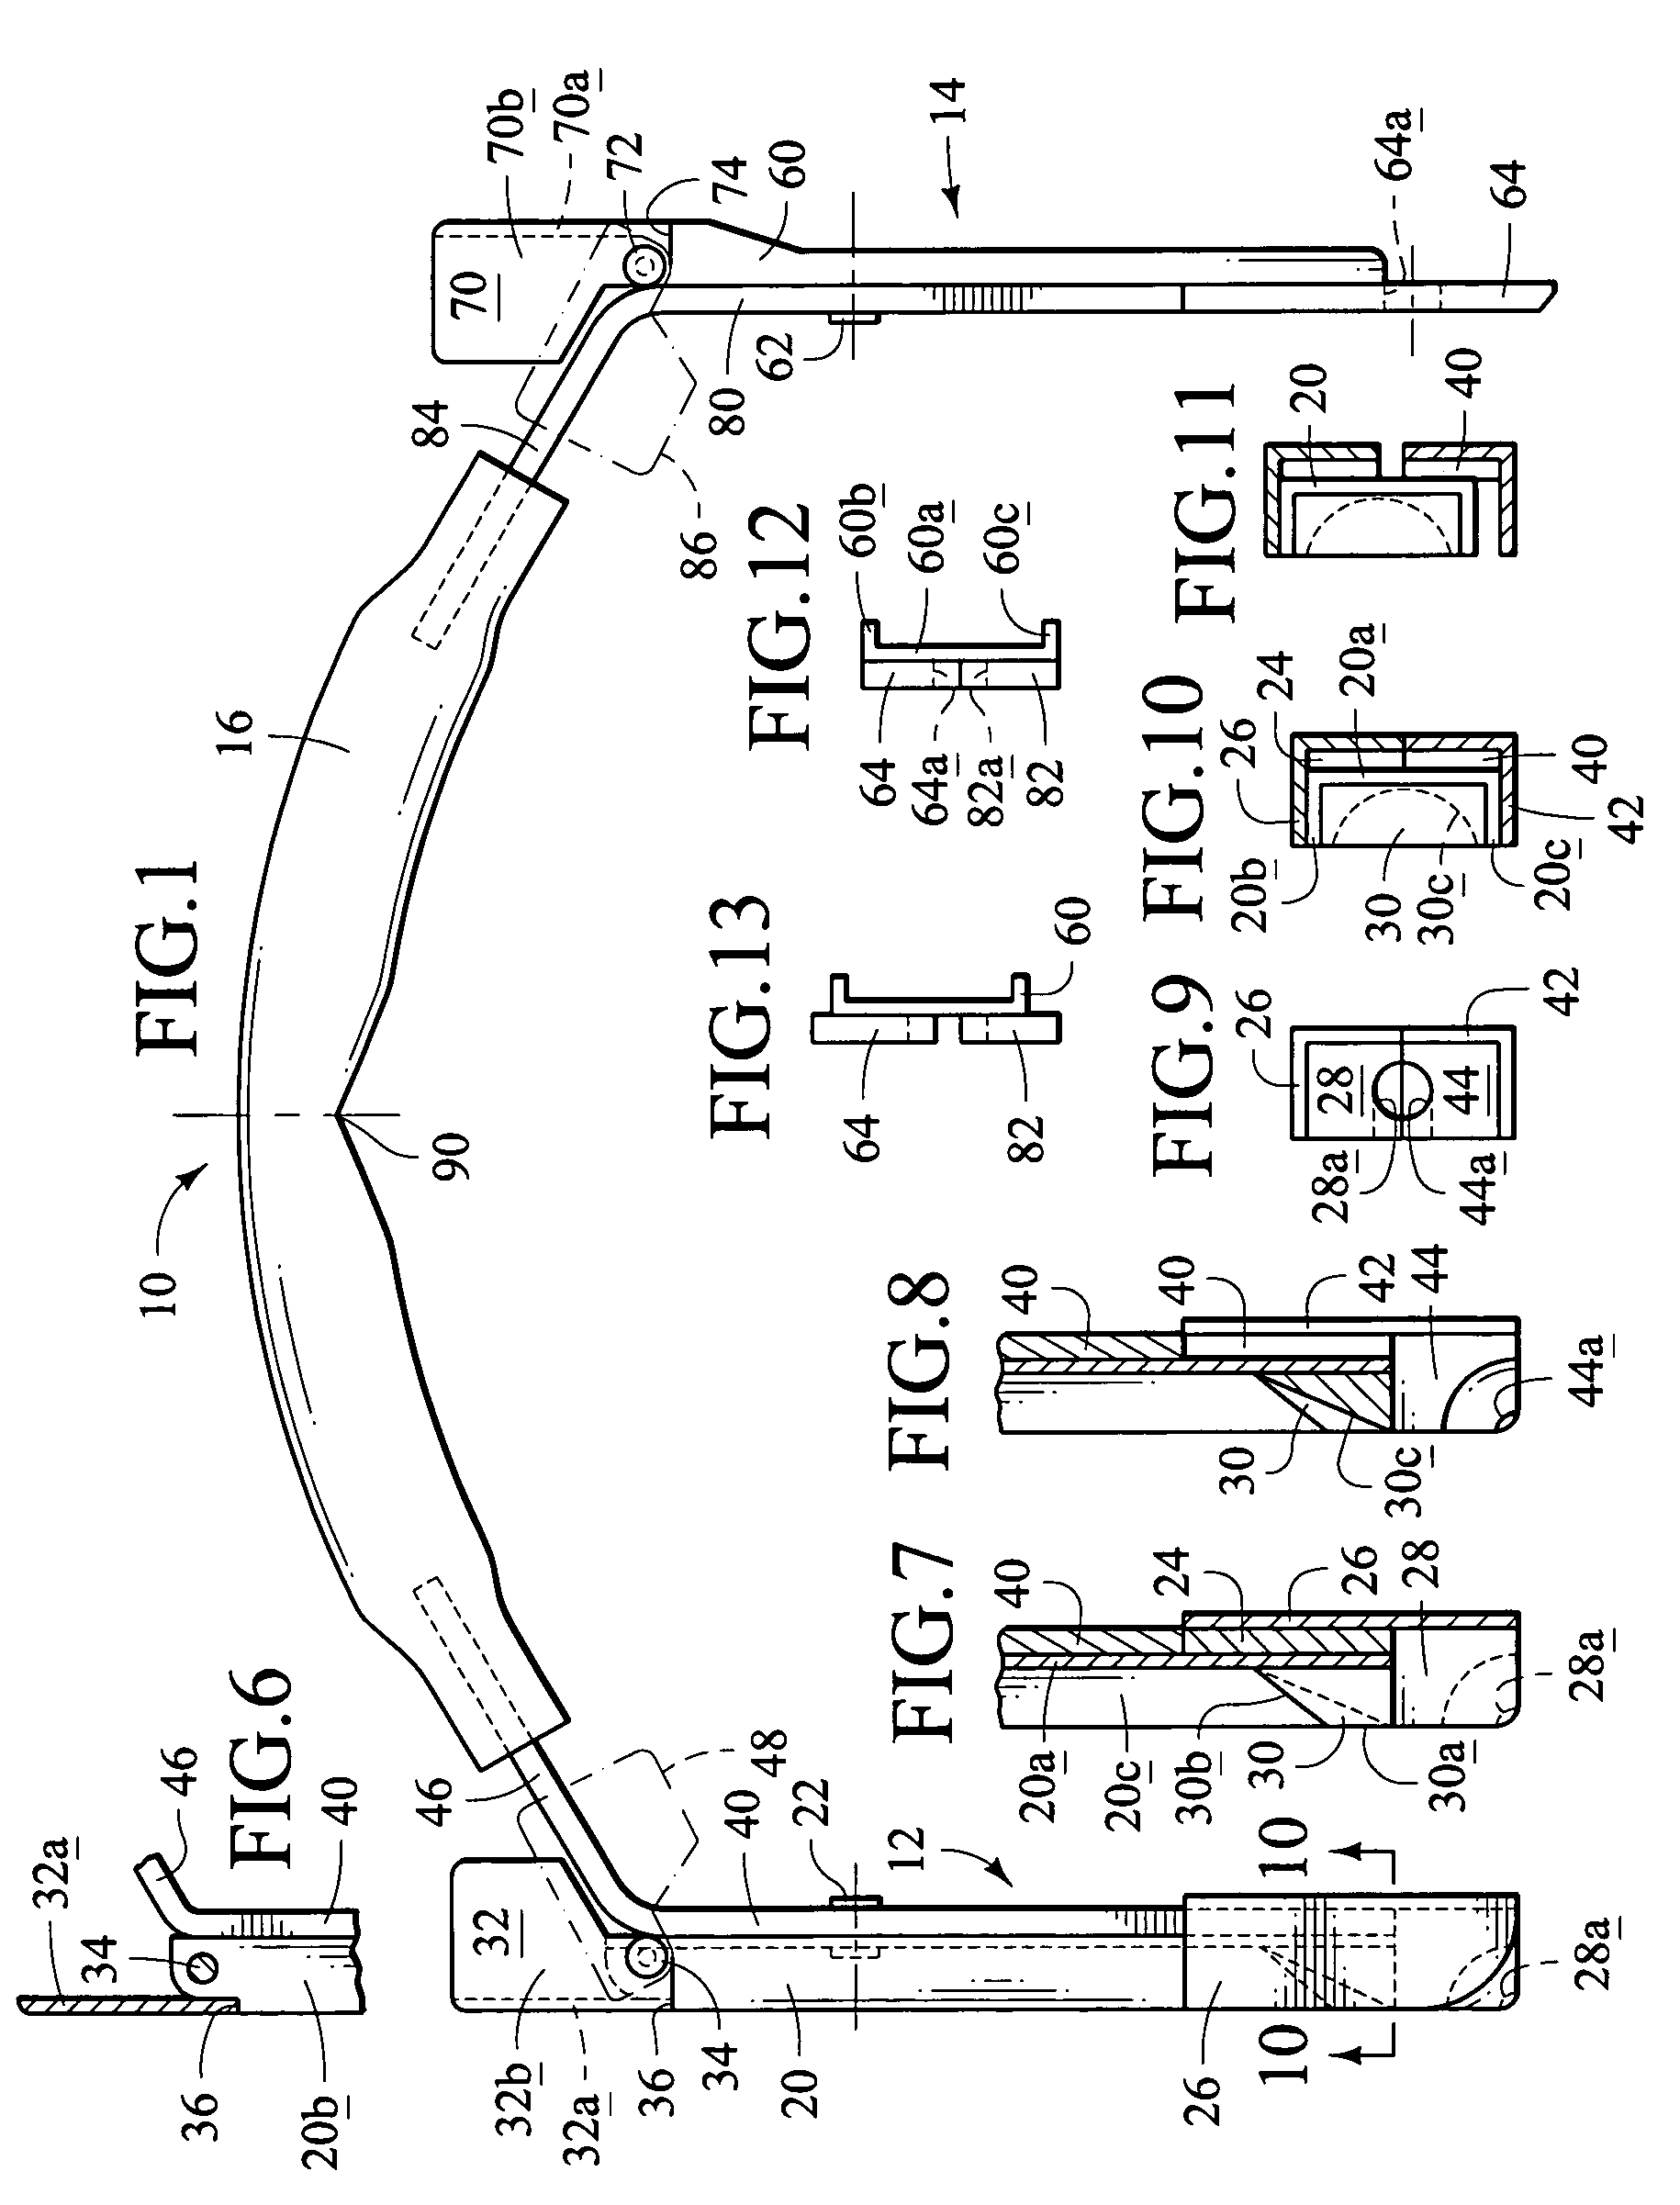 System for installing chains on vehicle tires